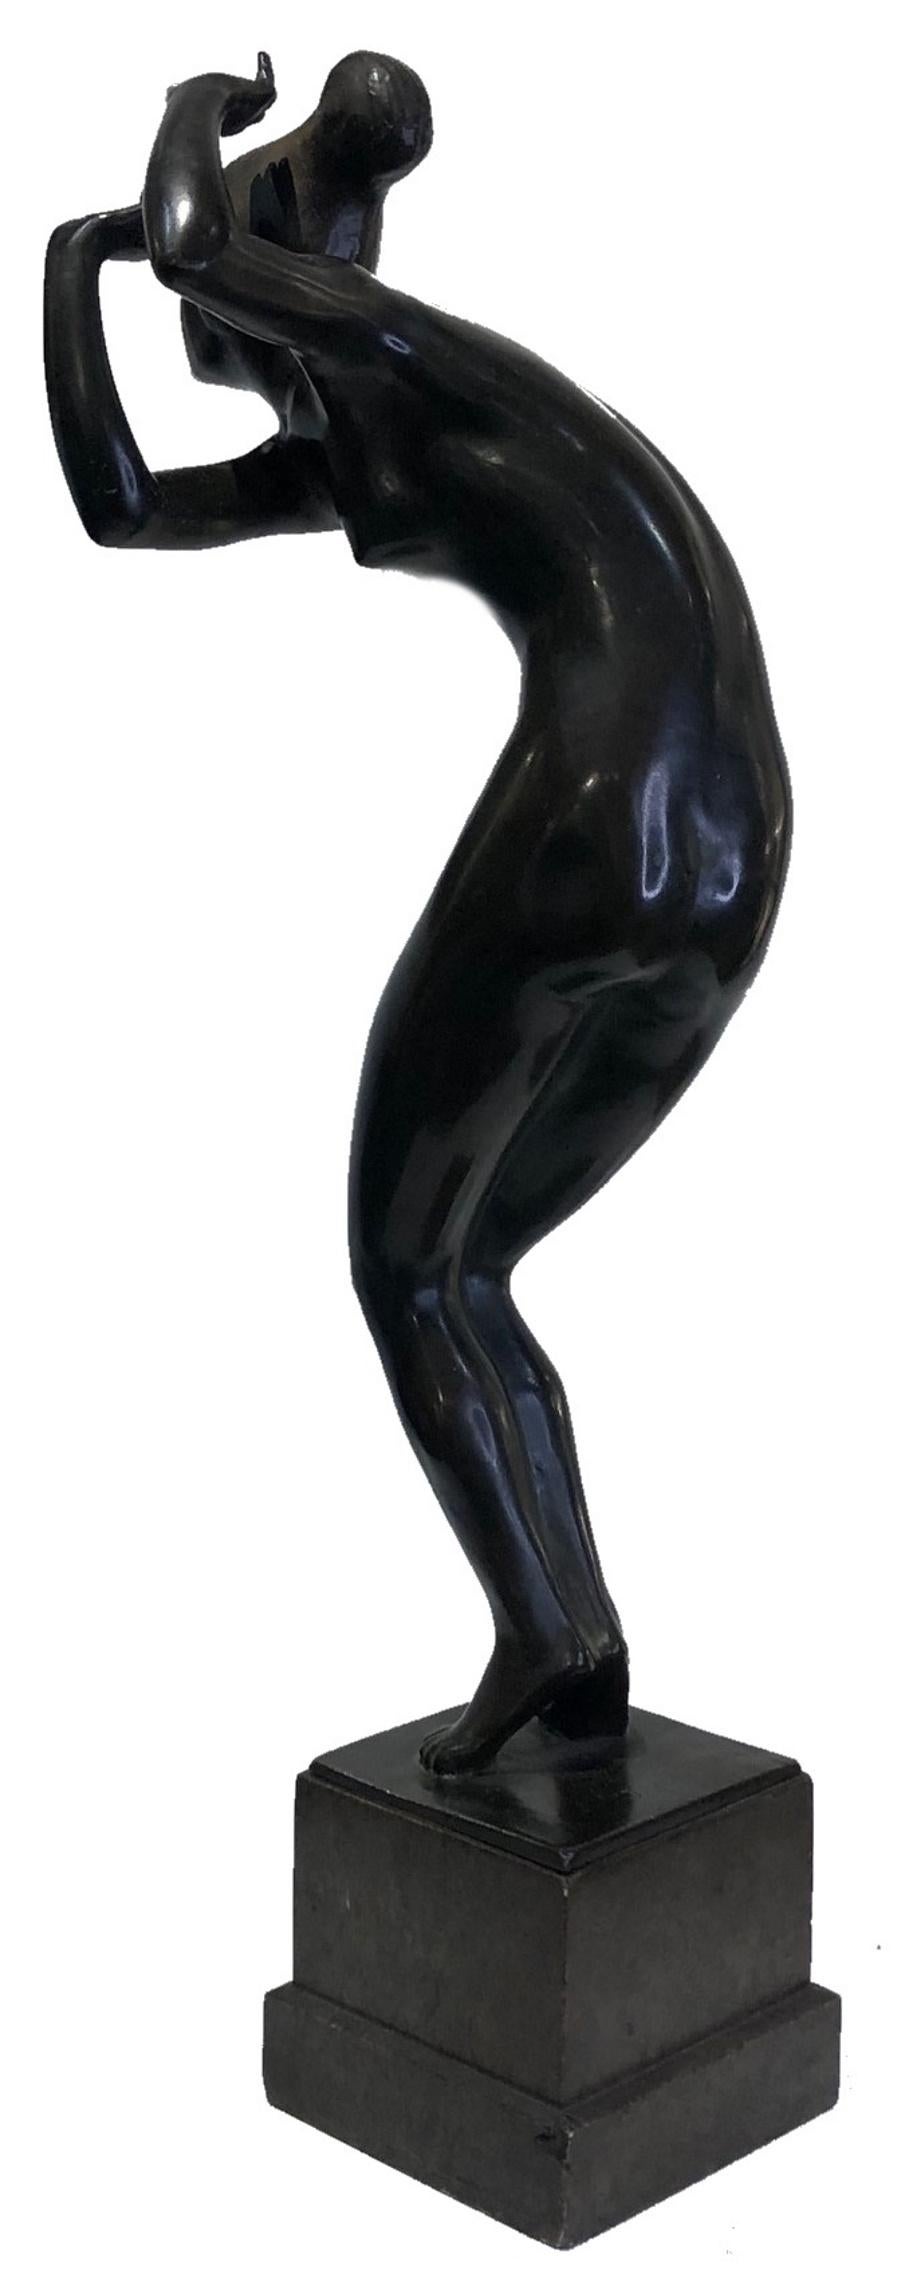 Belgian Art Deco 
Jules Werson
Nude Female Dancer 
Patinated Bronze Sculpture
Circa 1920 

DIMENSIONS
Height: 18 inches            Width: 7 inches            Depth: 3.75 inches

ABOUT
This sculpture in the “nu” genre, so popular in the Art Deco era,